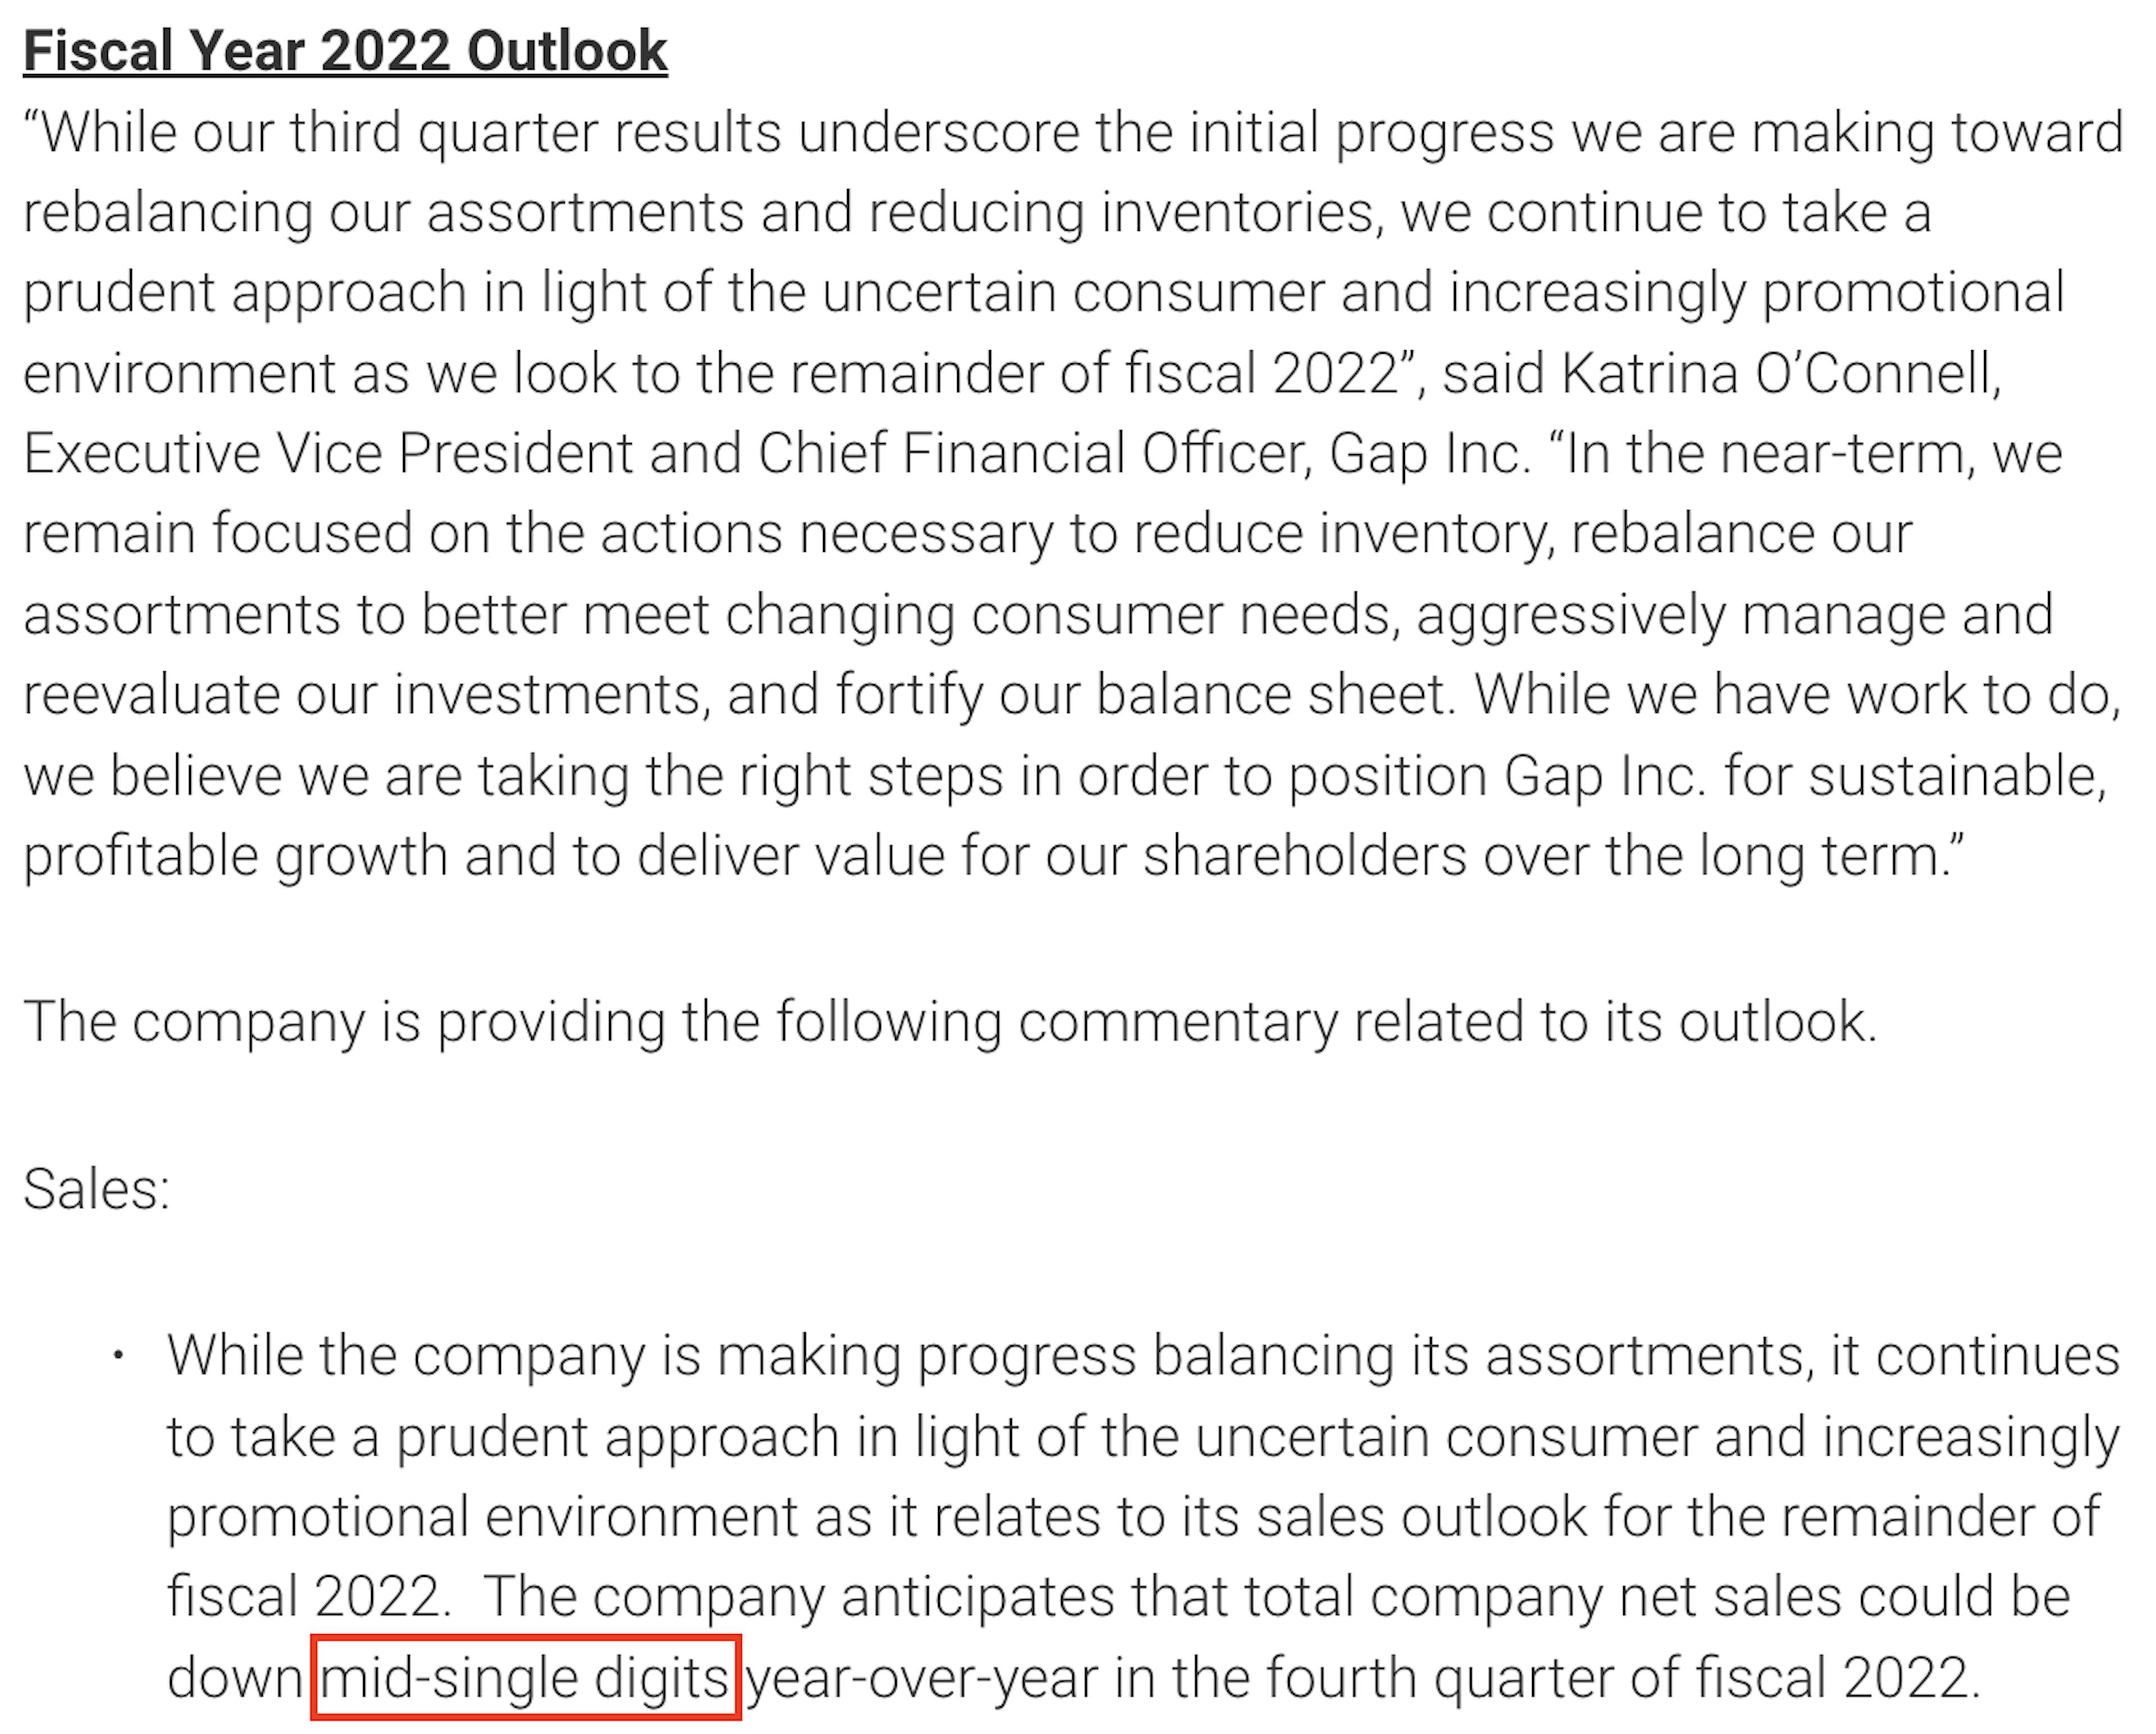 Figure 4: Gap Inc. Fiscal Report on 2022 outlook.